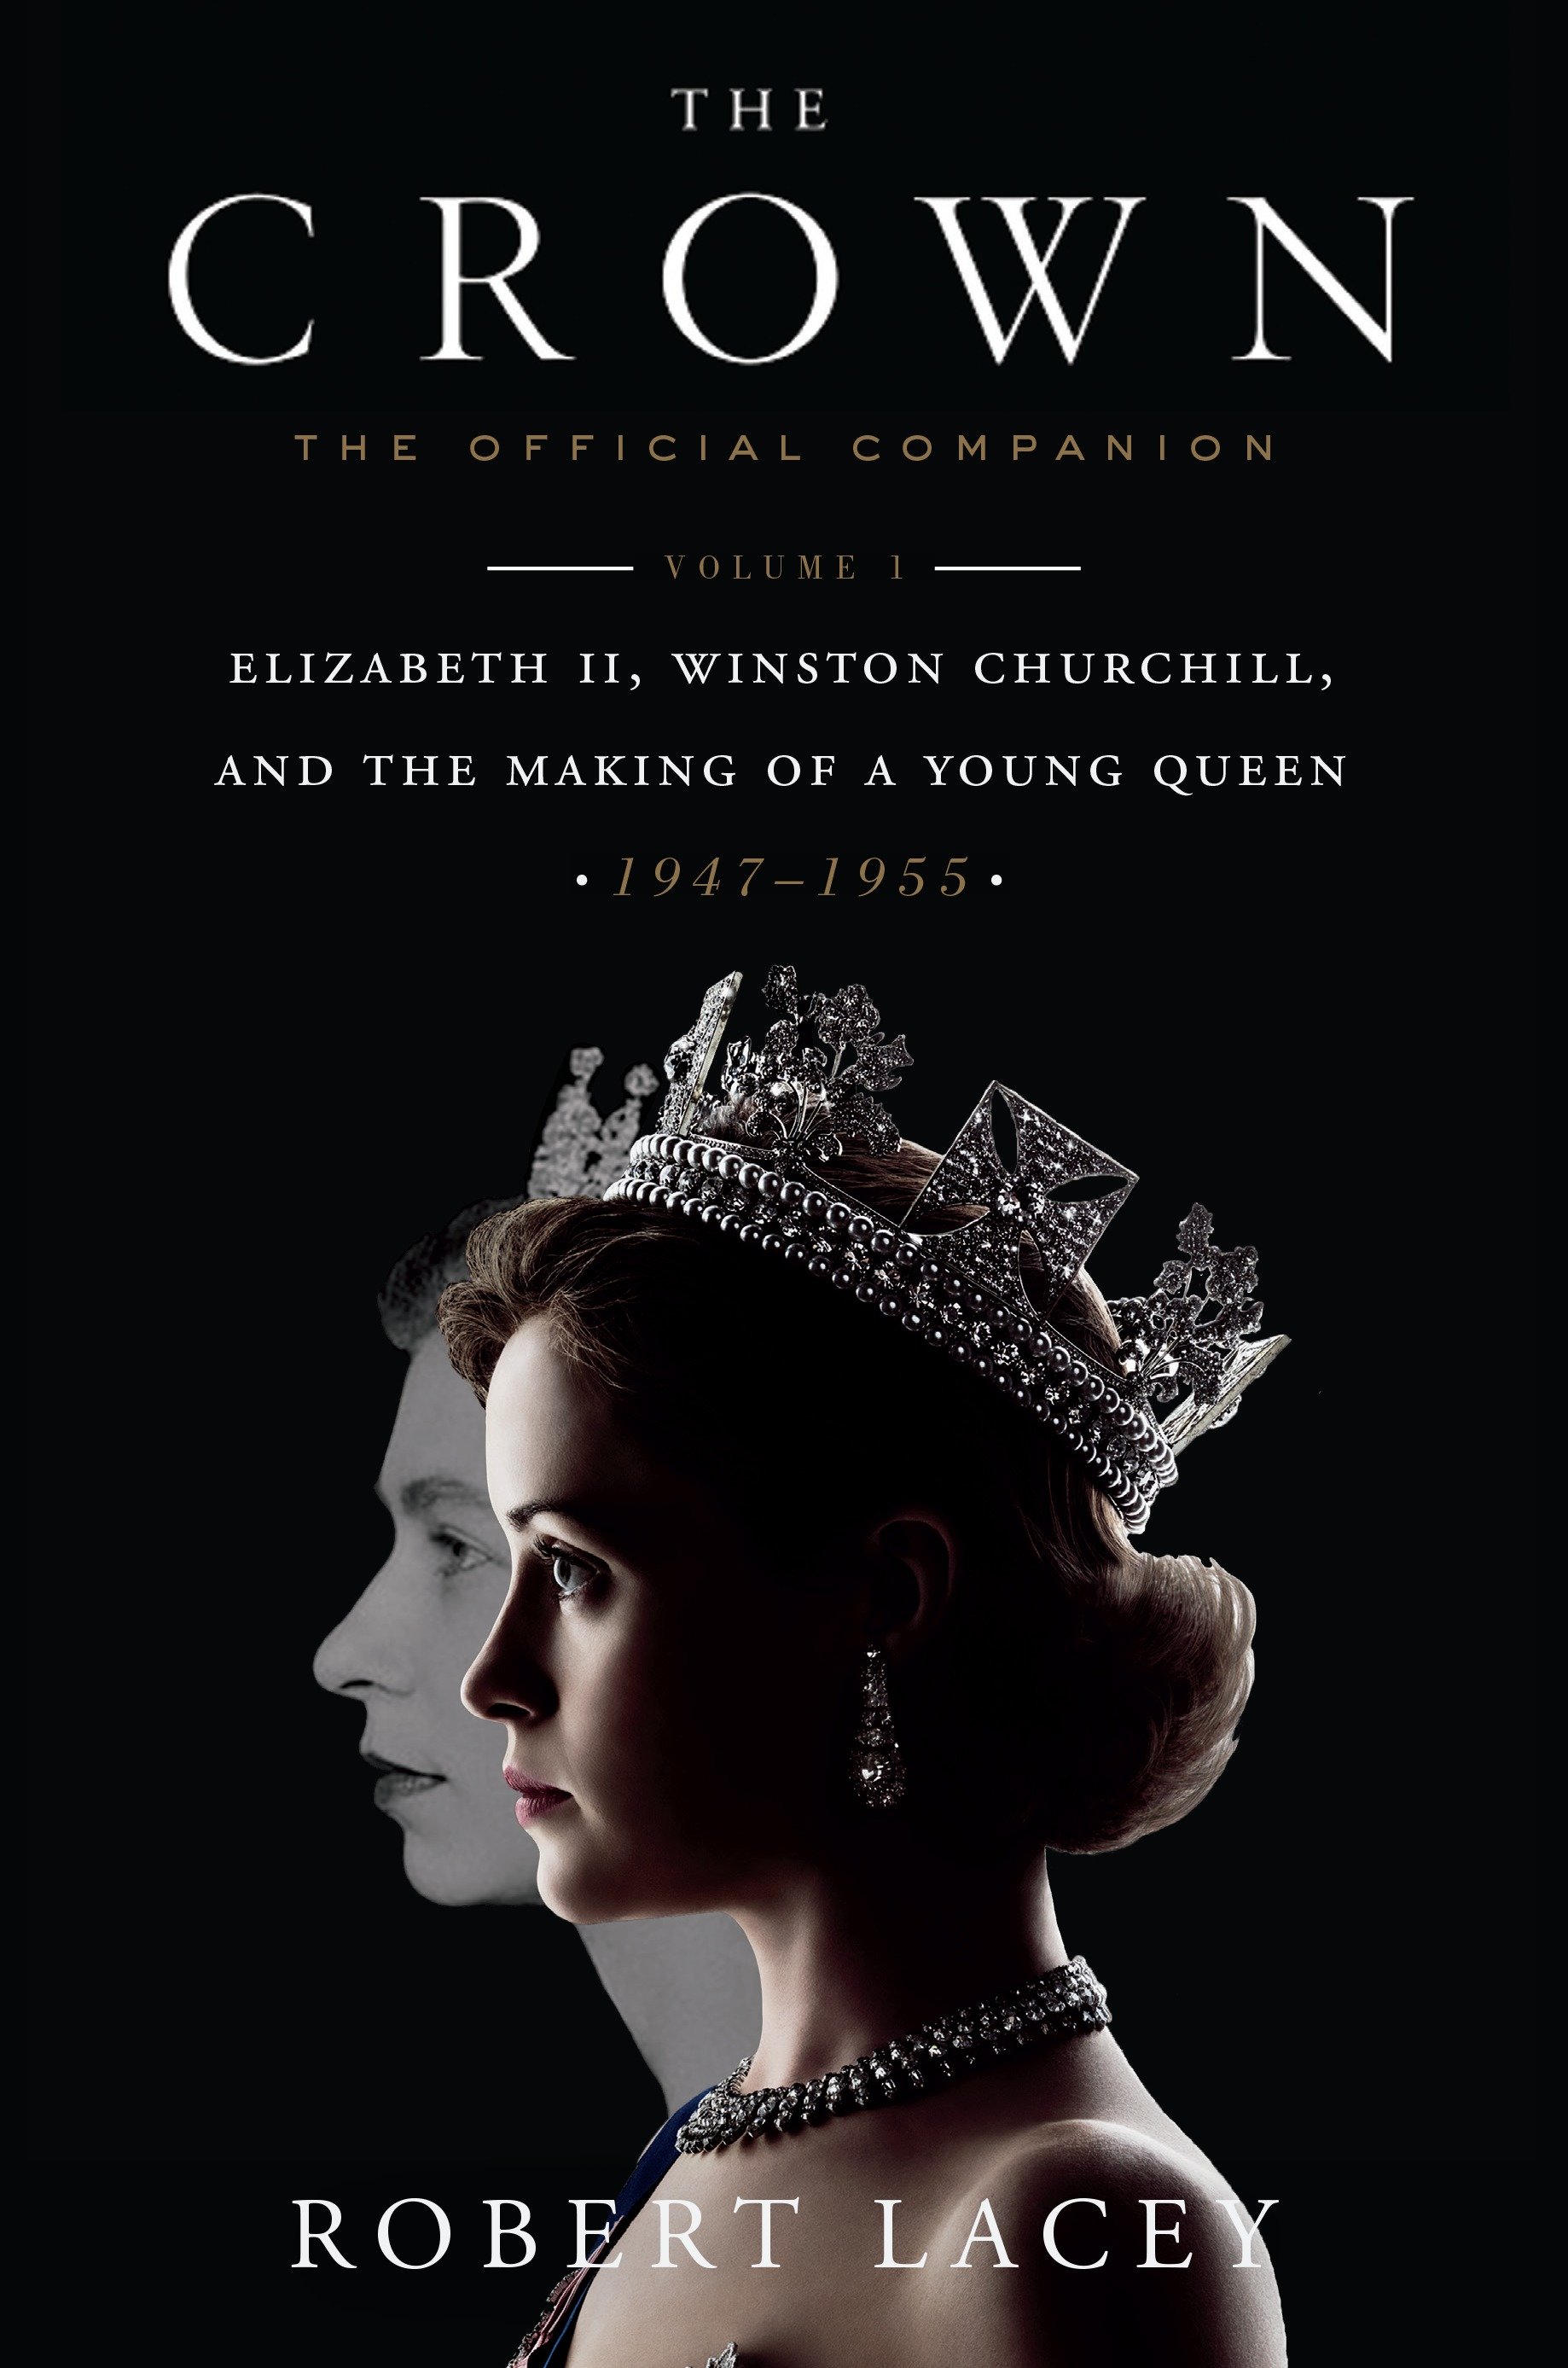 The Crown: The Official Companion, Volume 1 (Hardcover Book)